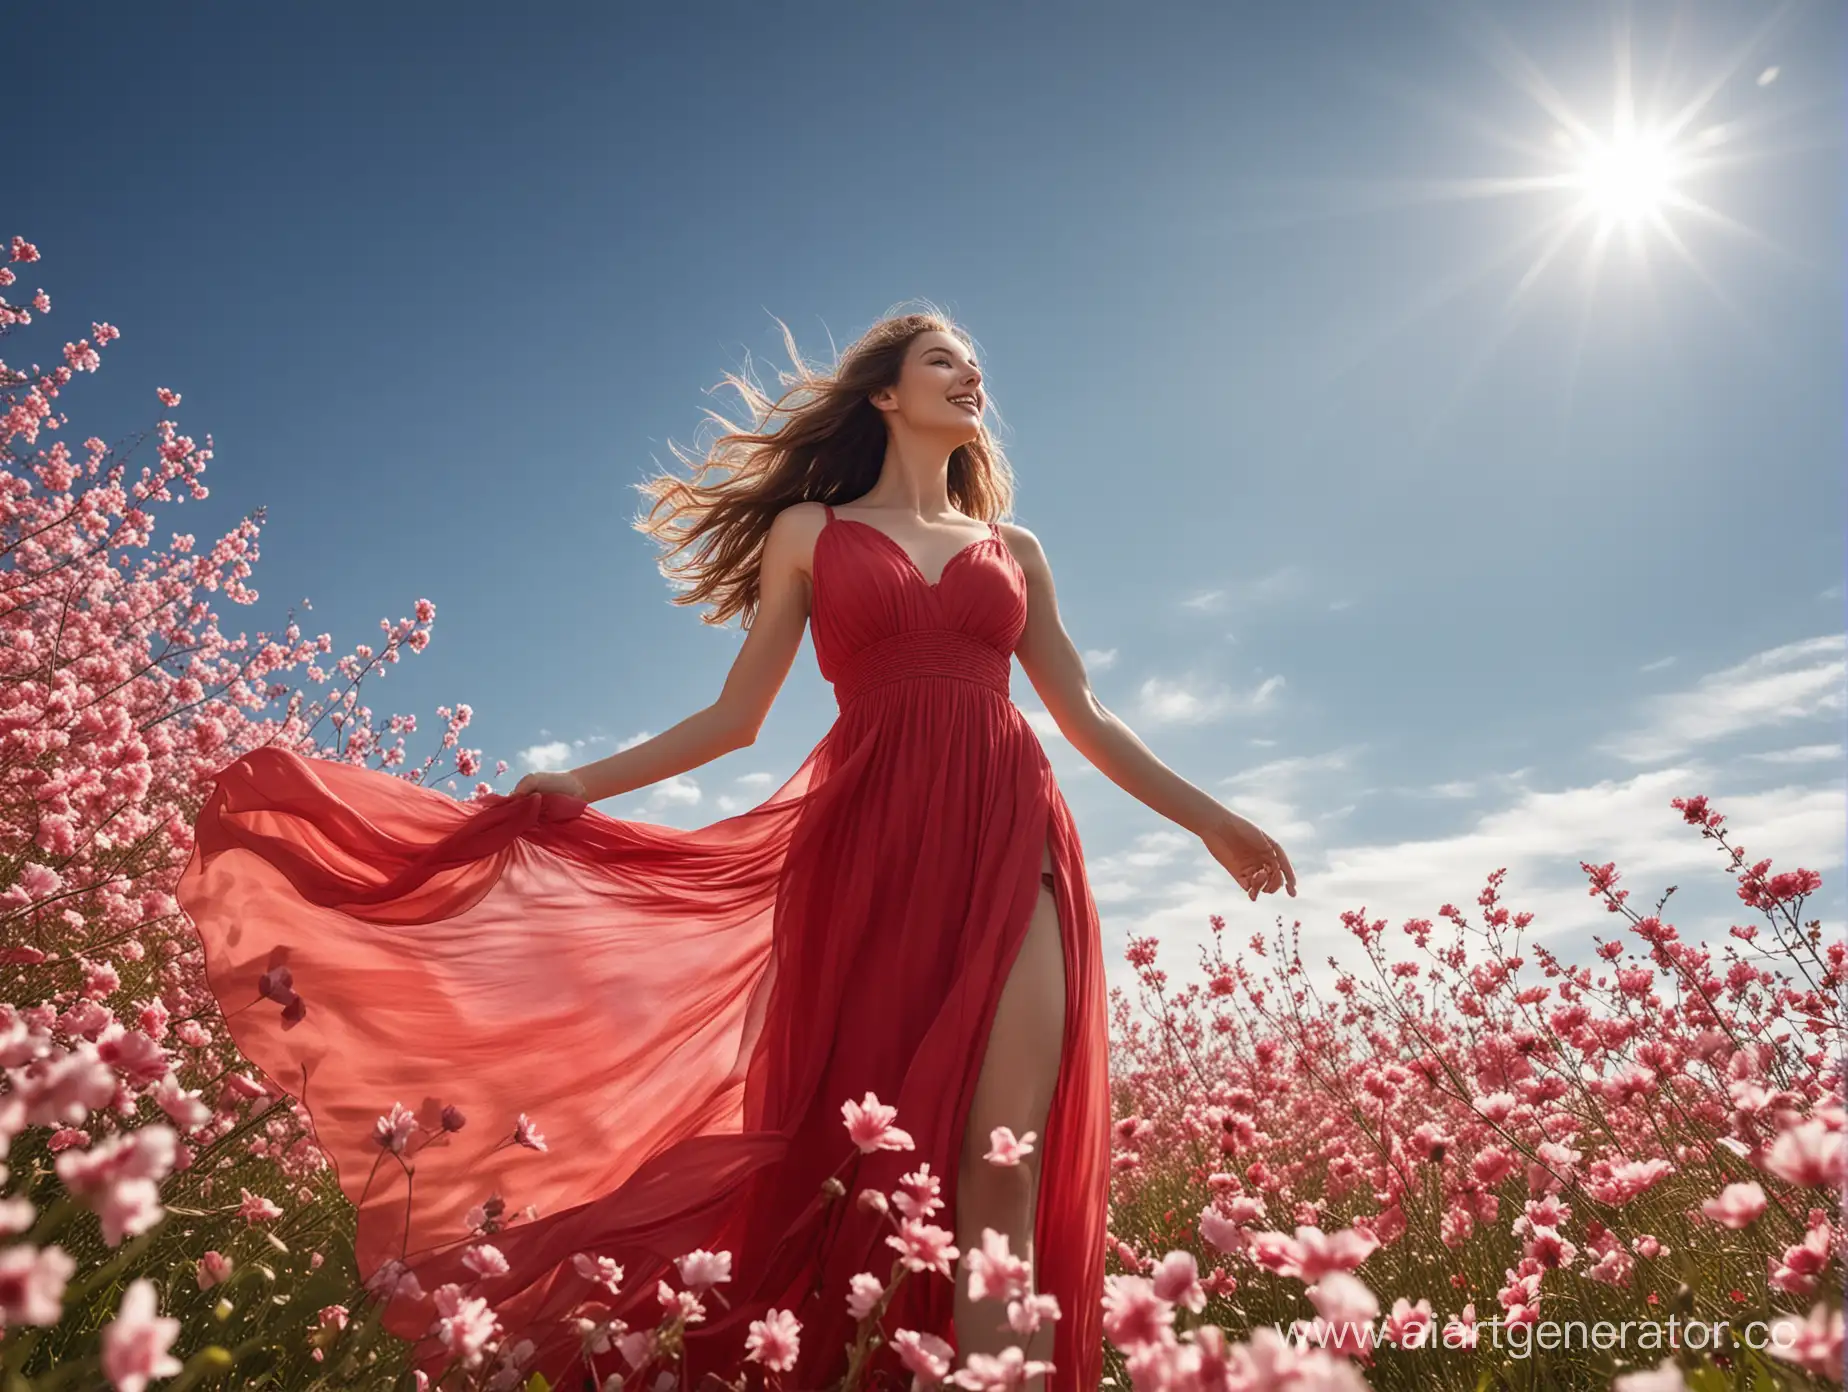 Romantic-Perfume-Ad-Elegant-Model-in-Red-Dress-with-Flowers-under-Sunlit-Blue-Sky